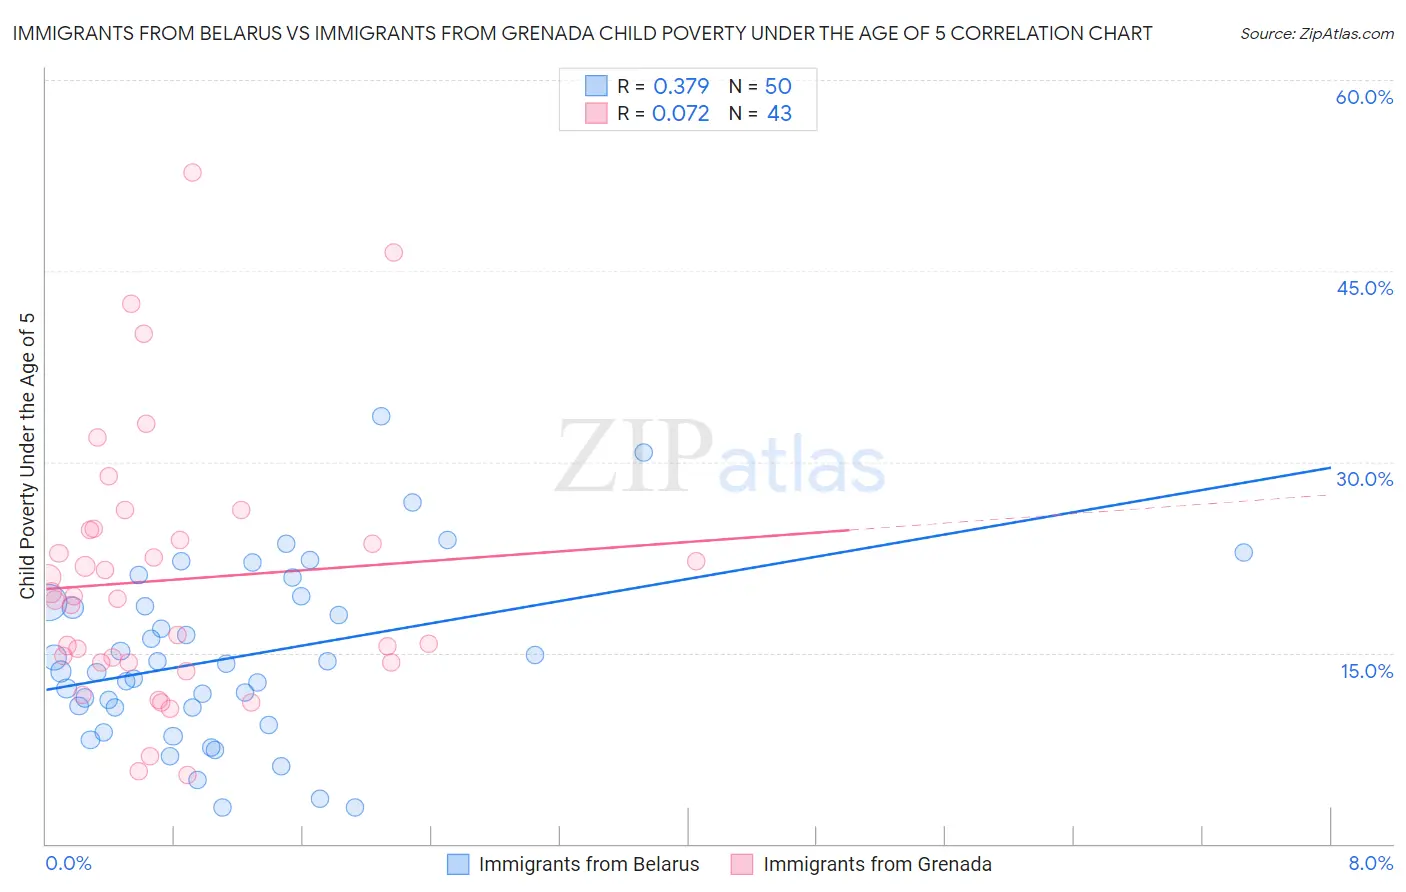 Immigrants from Belarus vs Immigrants from Grenada Child Poverty Under the Age of 5